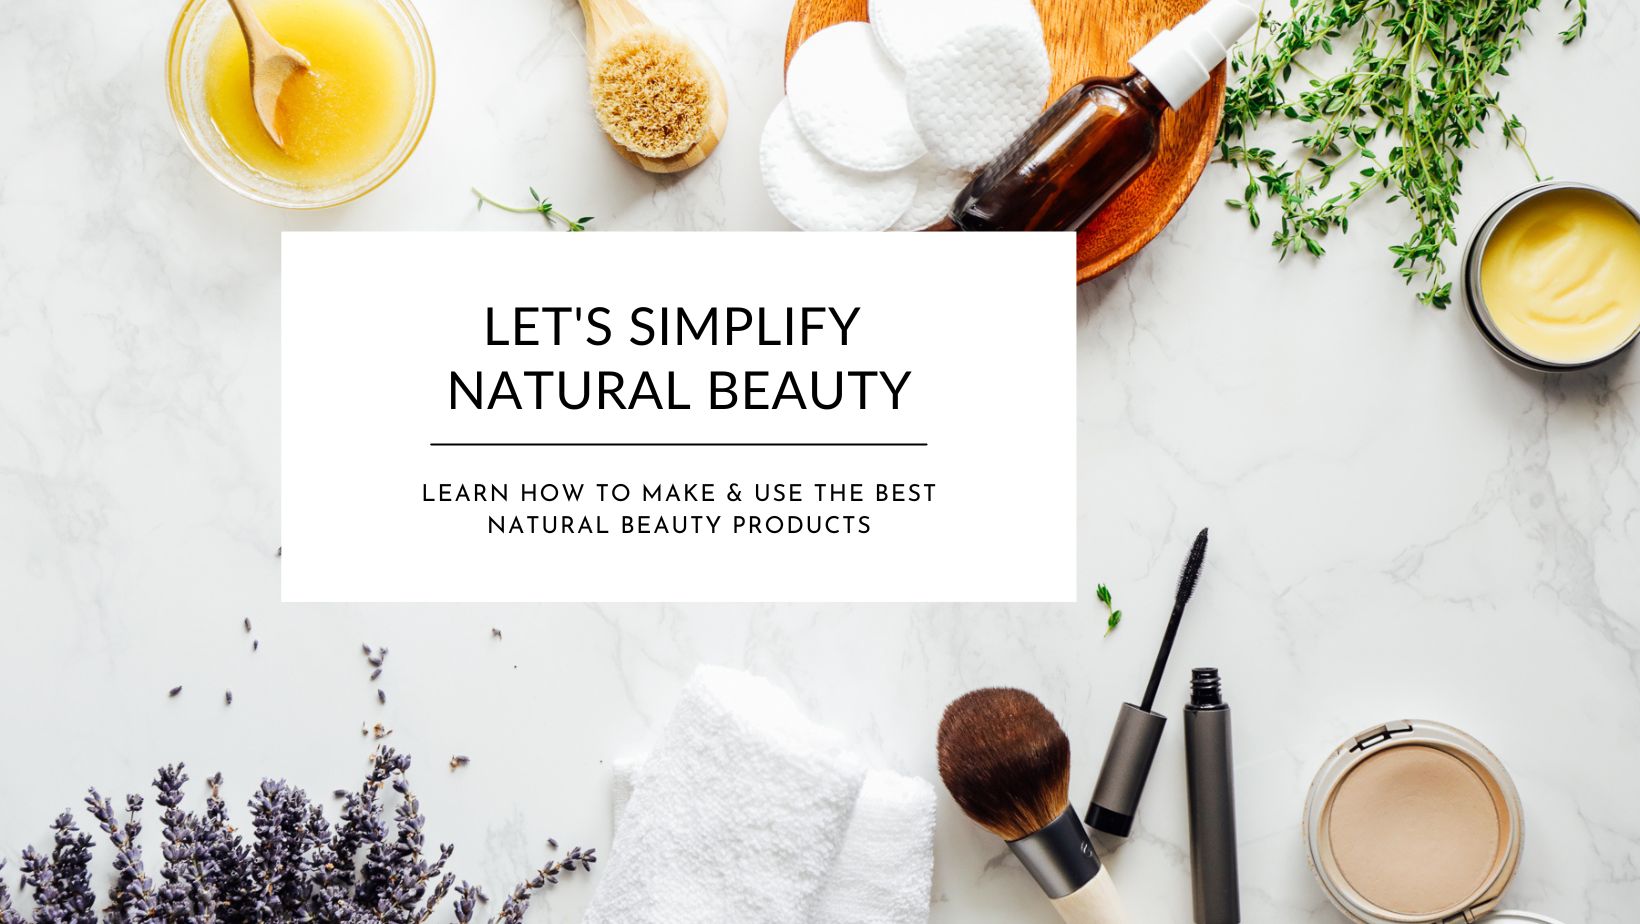 Live Simply Natural Body Care